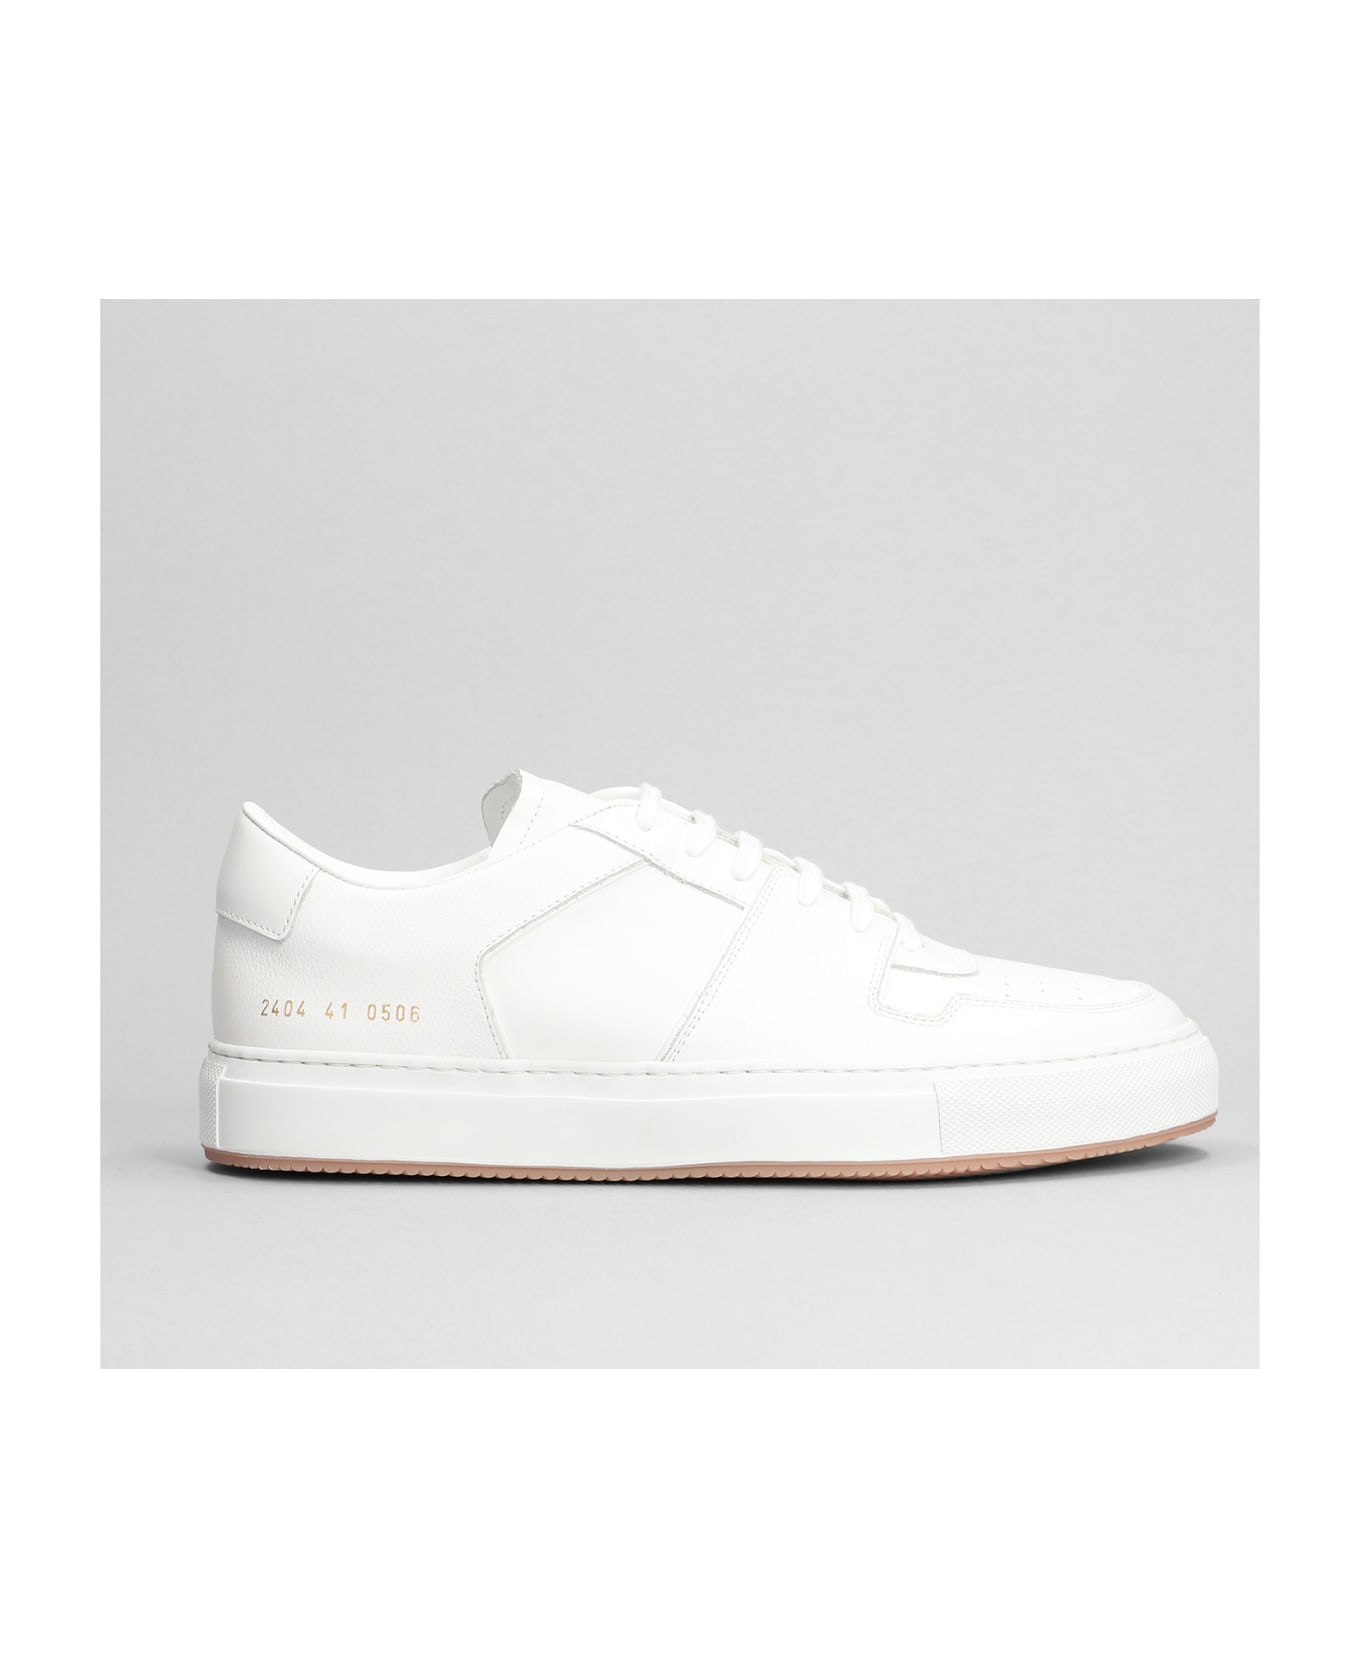 Common Projects Decades Low Sneakers In Martens Leather - Martens